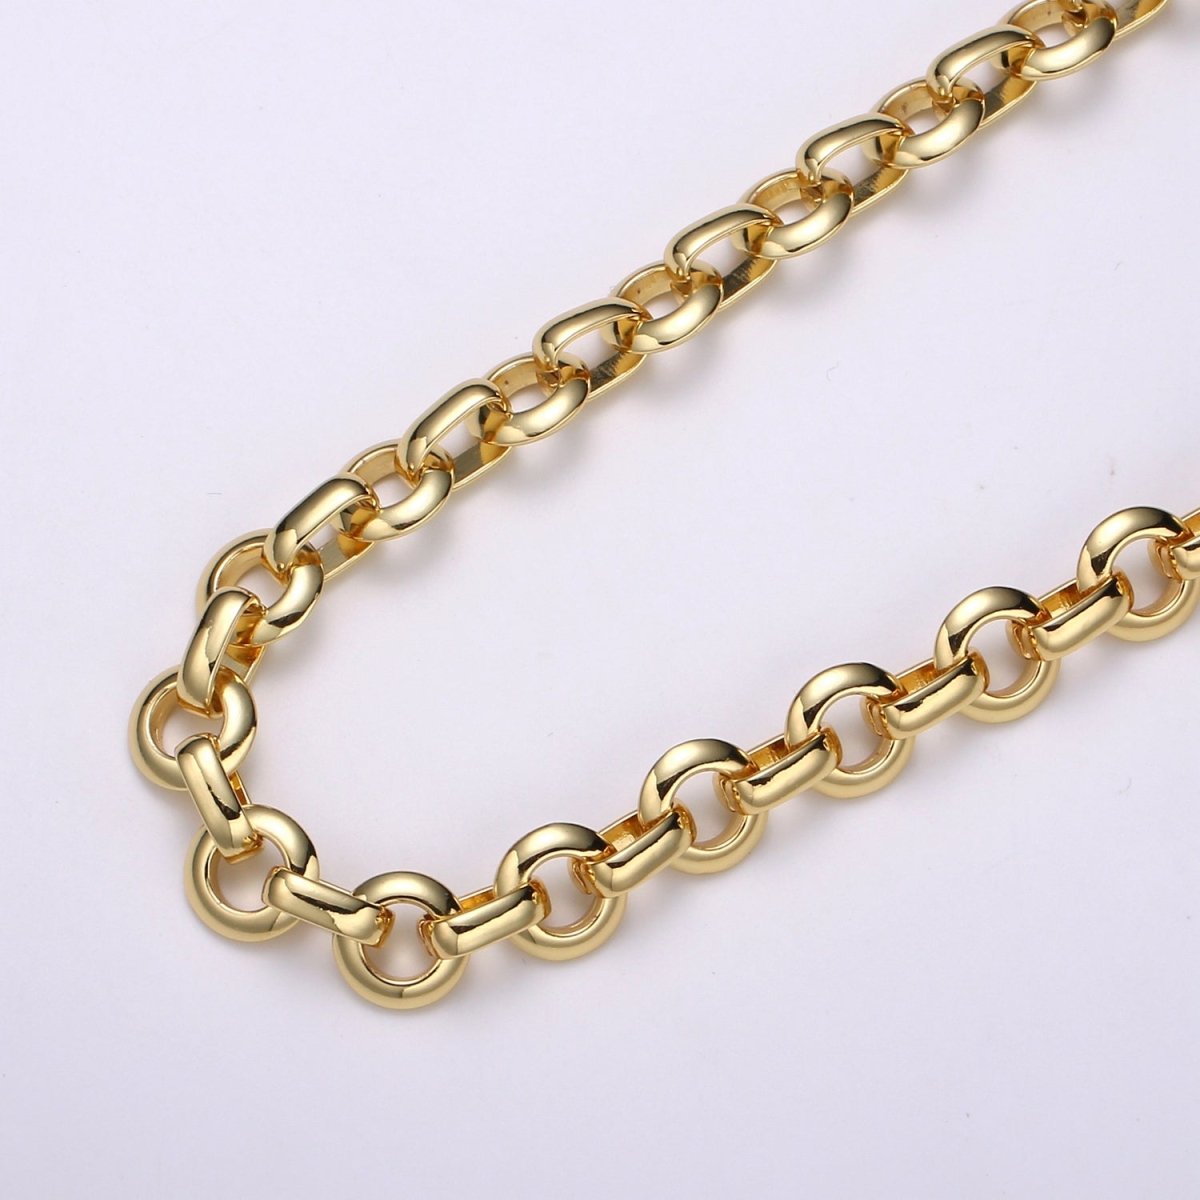 ROLO Chain, 24K Gold by Yard, Fancy Cable Link Chain, Round Chain Link for DIY Craft, Belt Chain, Clip Chain | ROLL-486 Clearance Pricing - DLUXCA